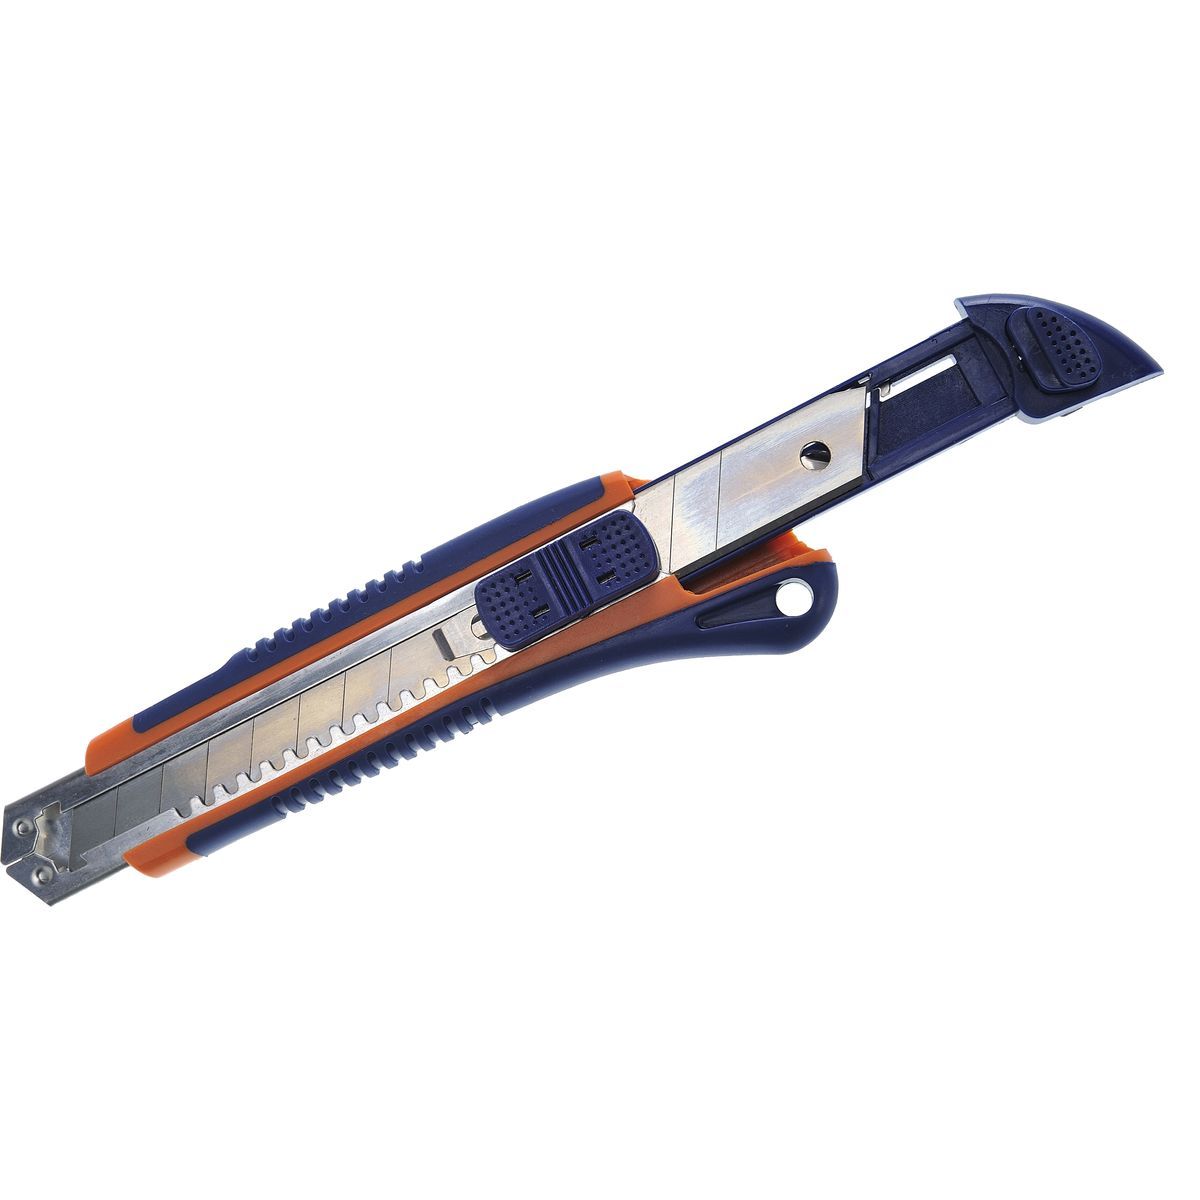 Portwest KN40 - Retractable Safety Cutter Blue